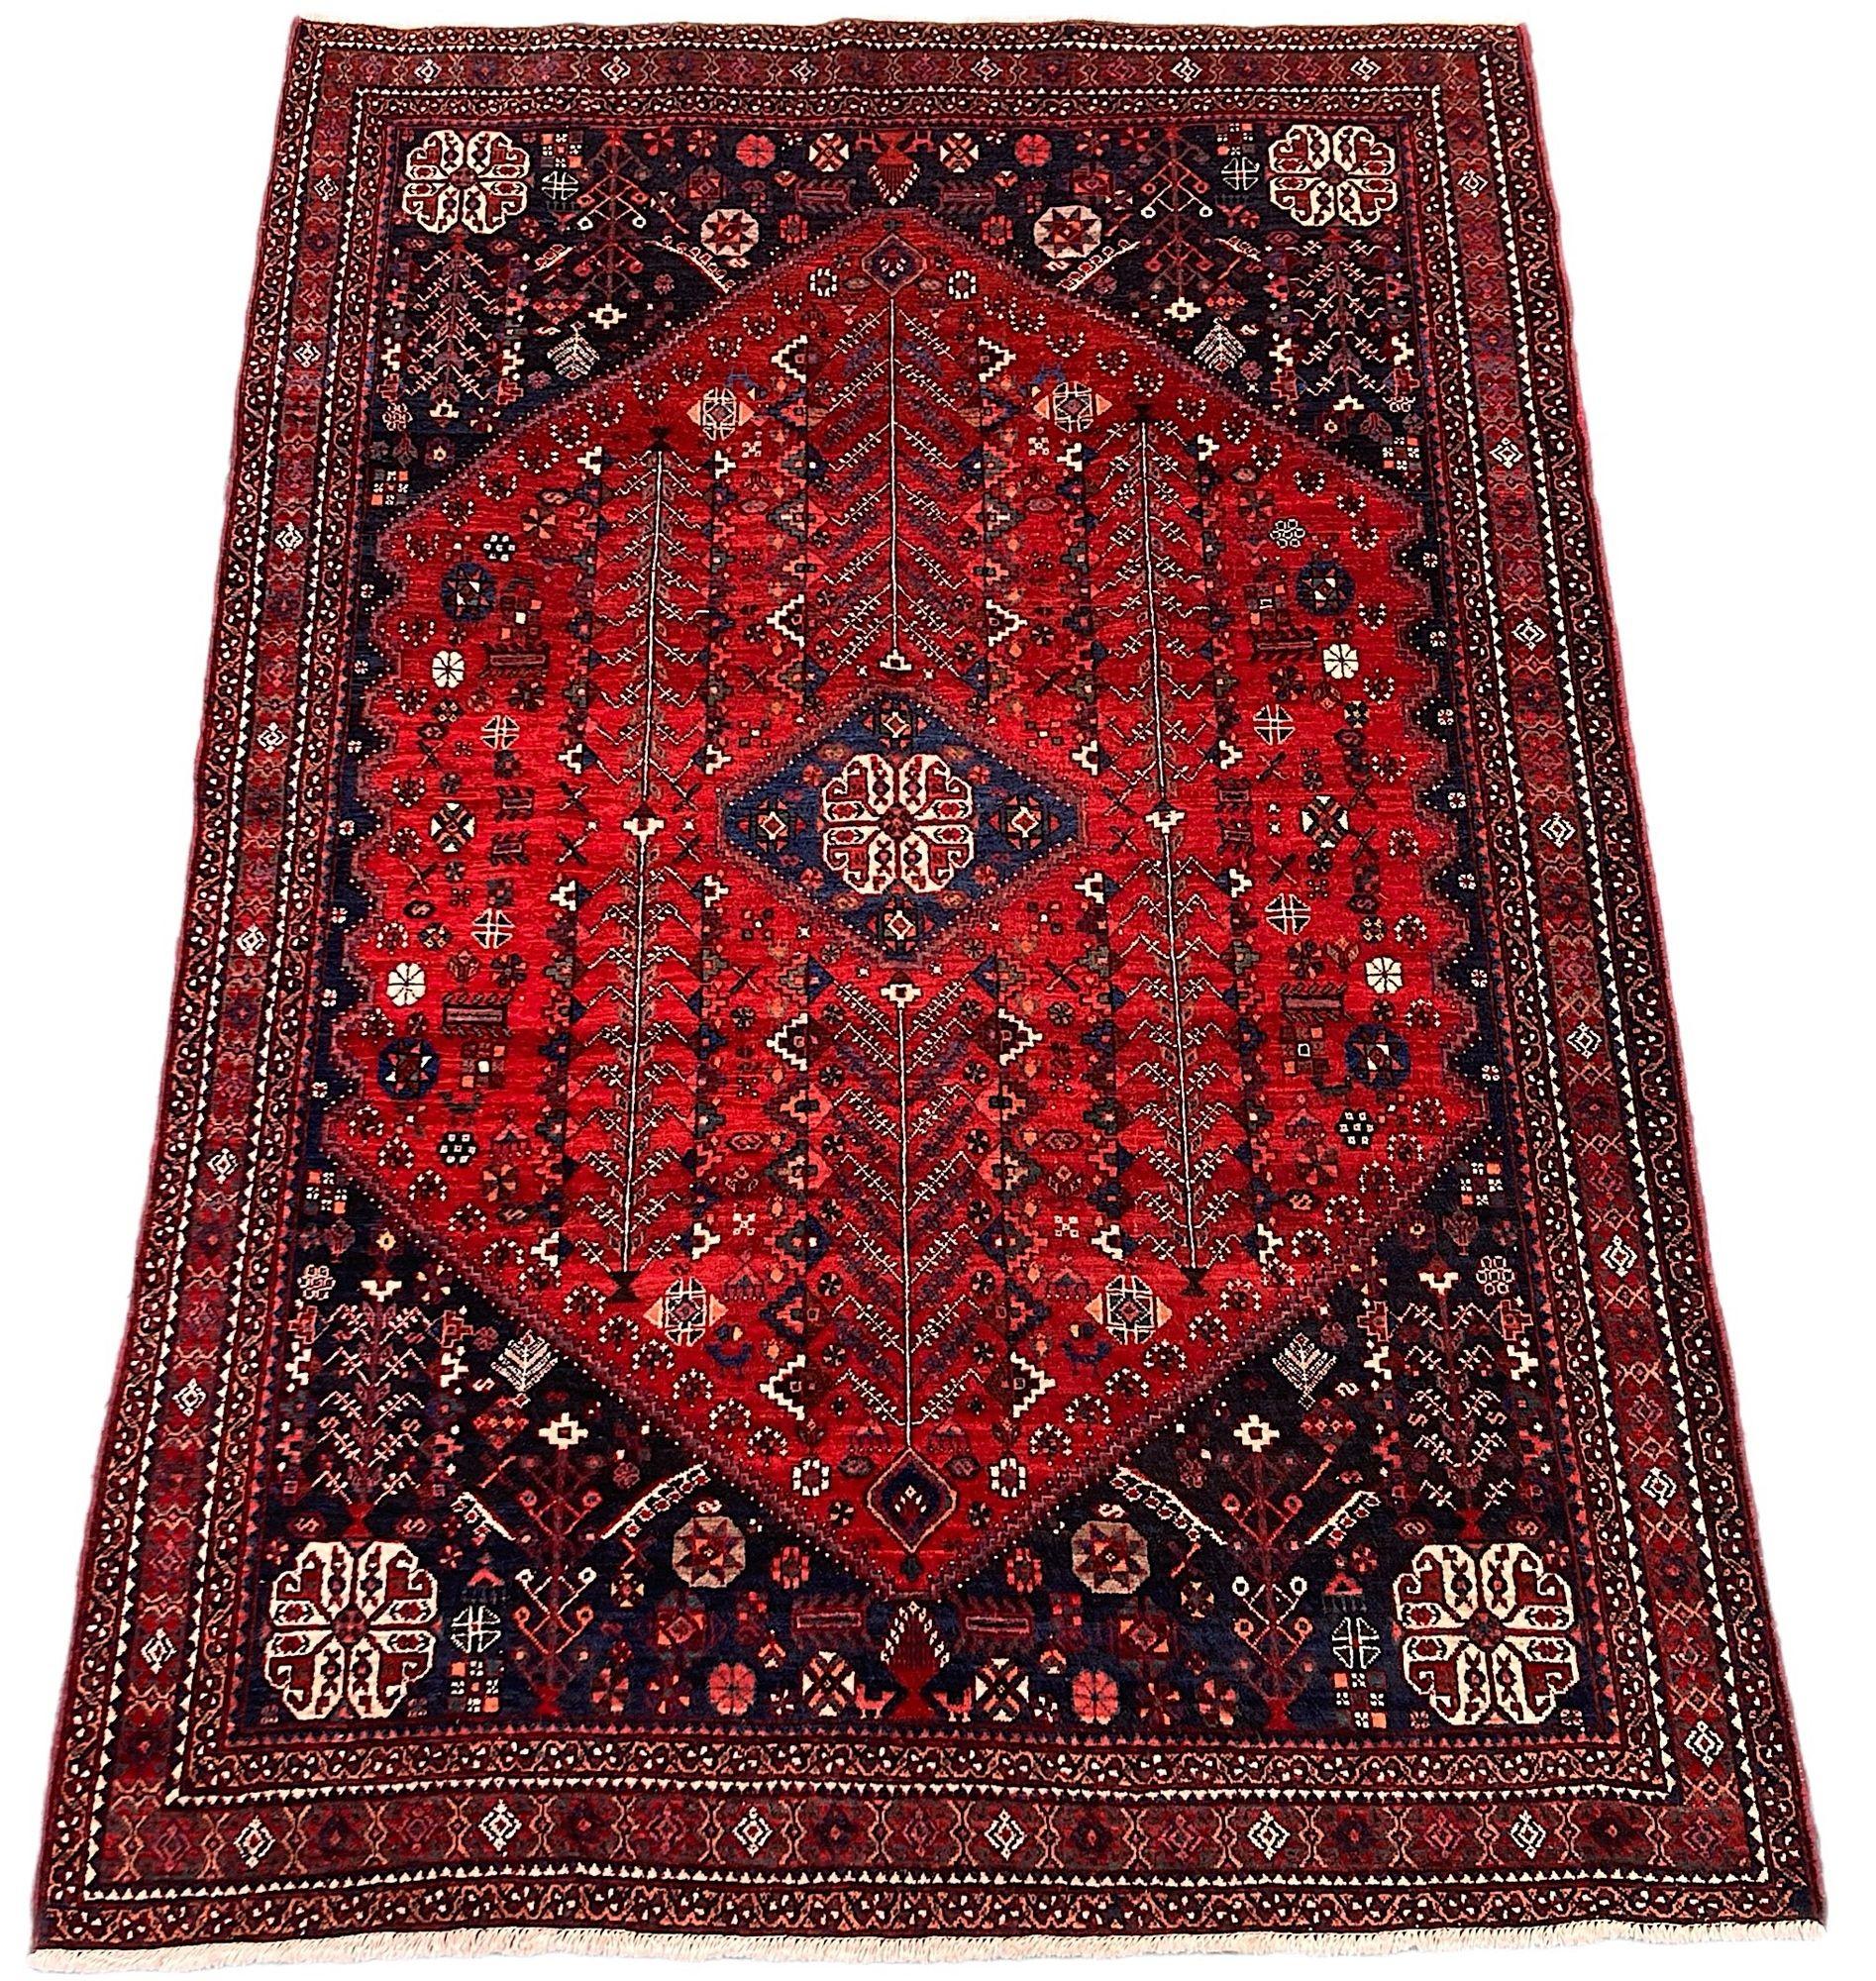 A beautiful antique Abadeh rug, hand woven circa 1920. The design features a small geometrical medallion on a rich red field of stylised flowers and vines surrounded by a deep indigo border. Finely woven with soft, velvety wool and lovely secondary